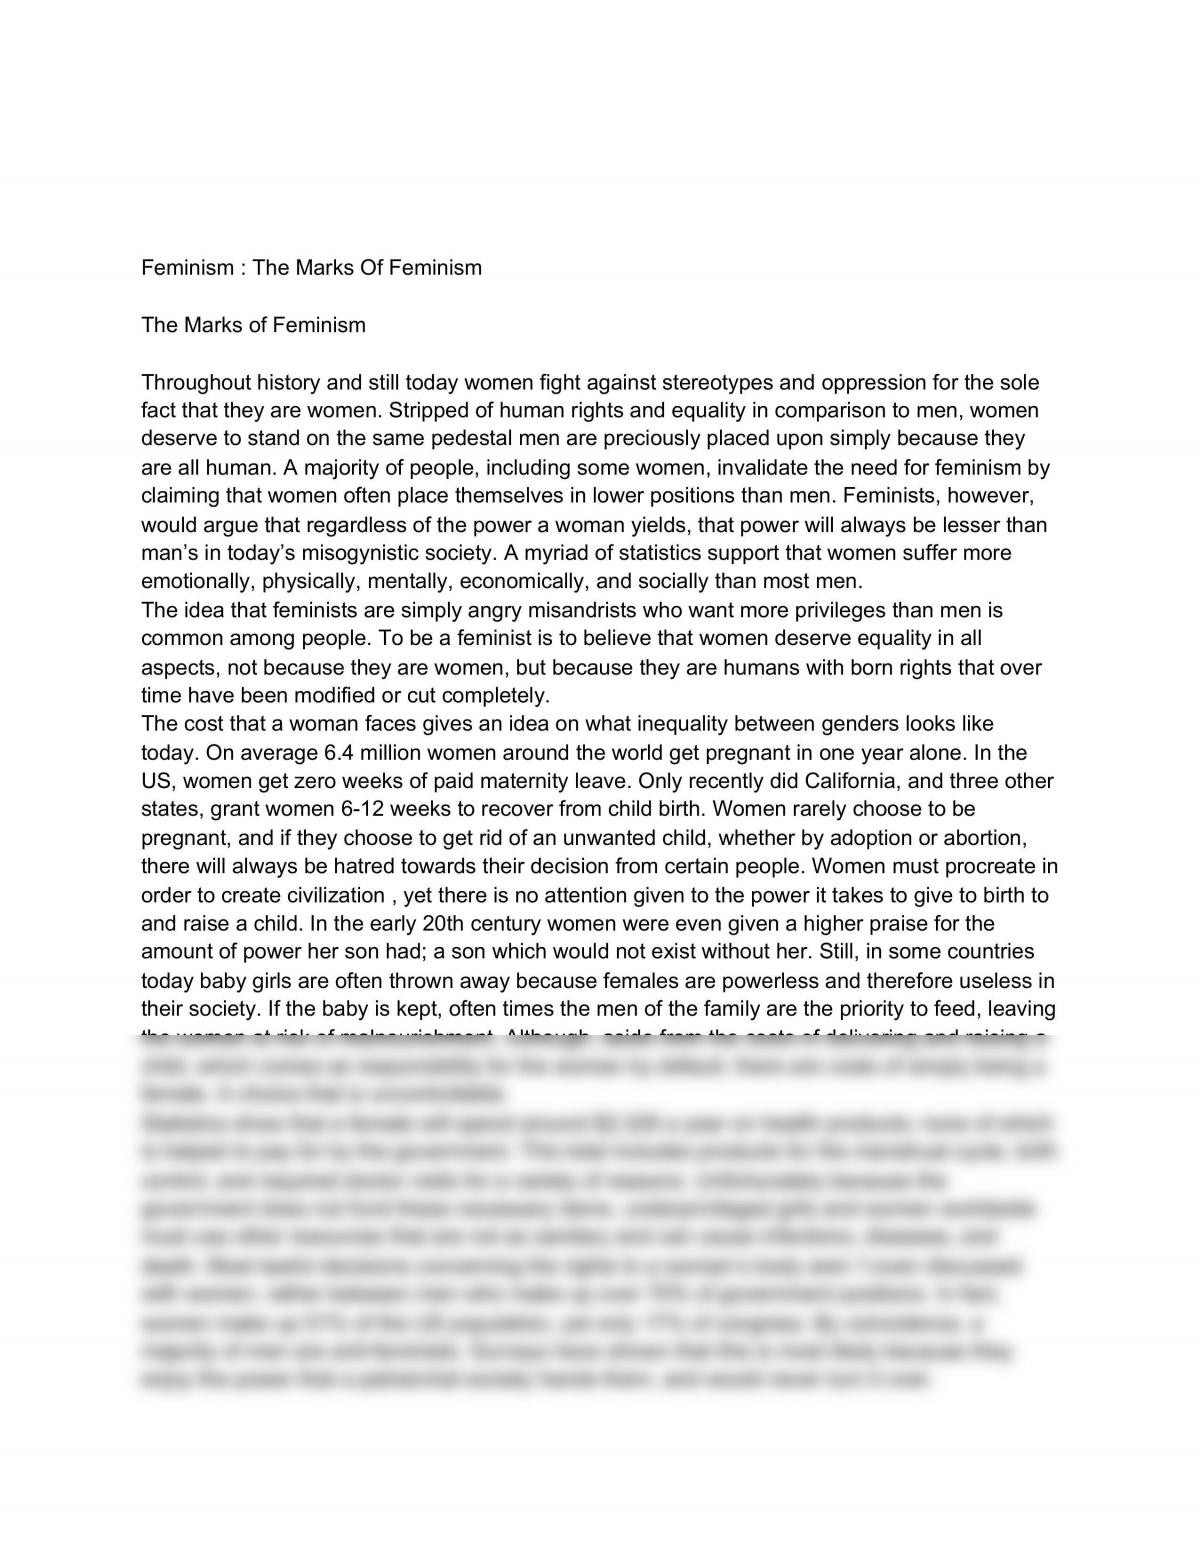 Feminism: The Marks of Feminism - Page 1